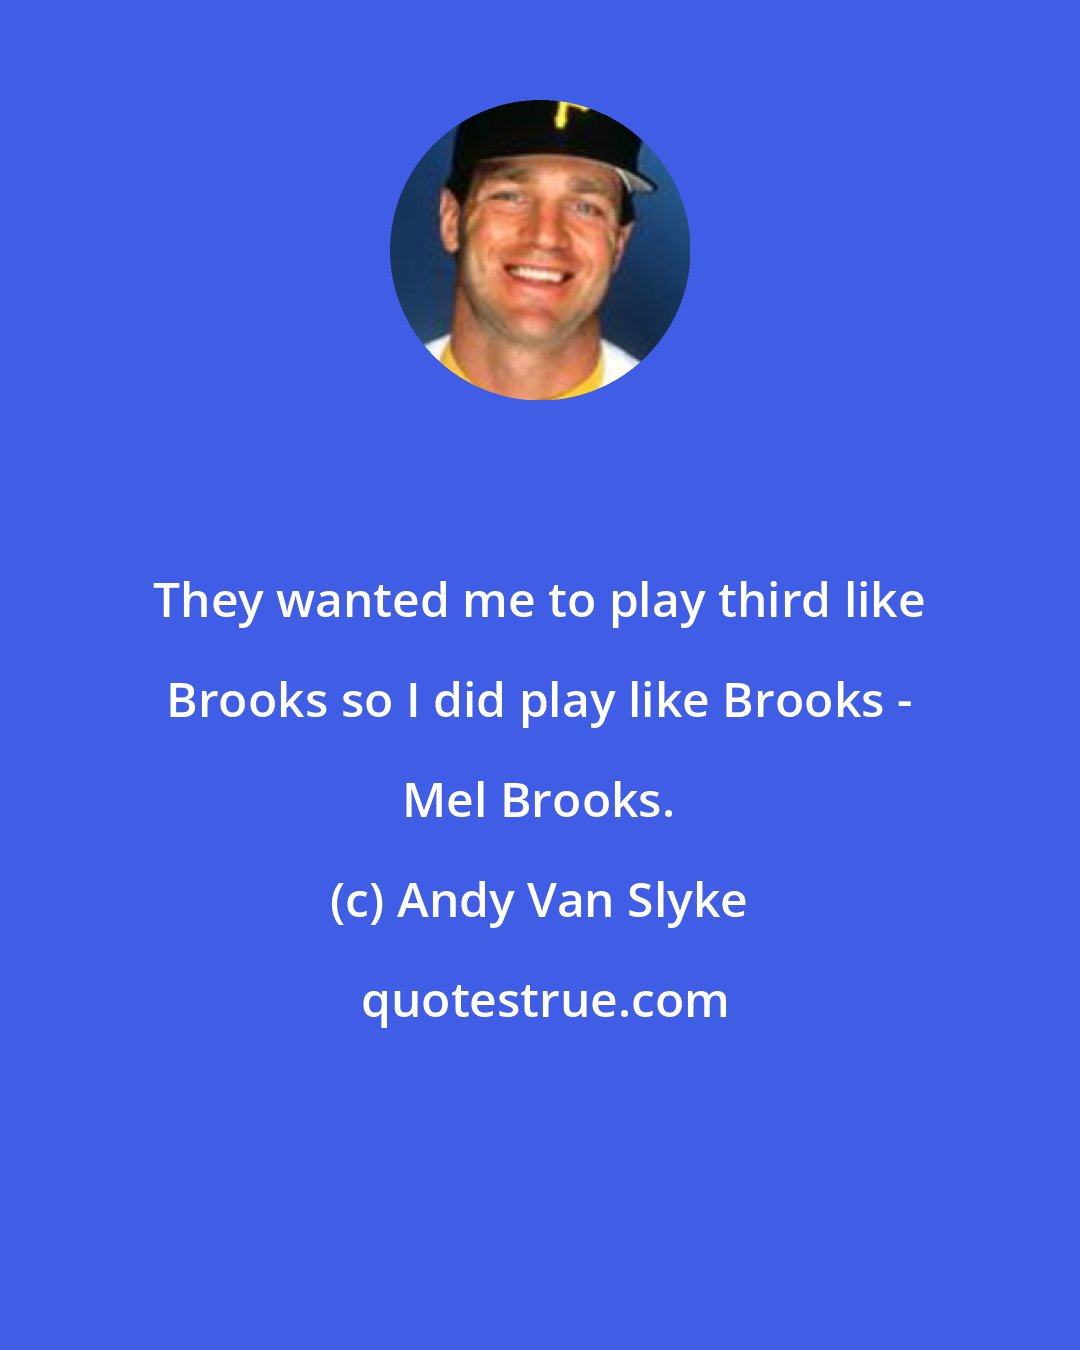 Andy Van Slyke: They wanted me to play third like Brooks so I did play like Brooks - Mel Brooks.